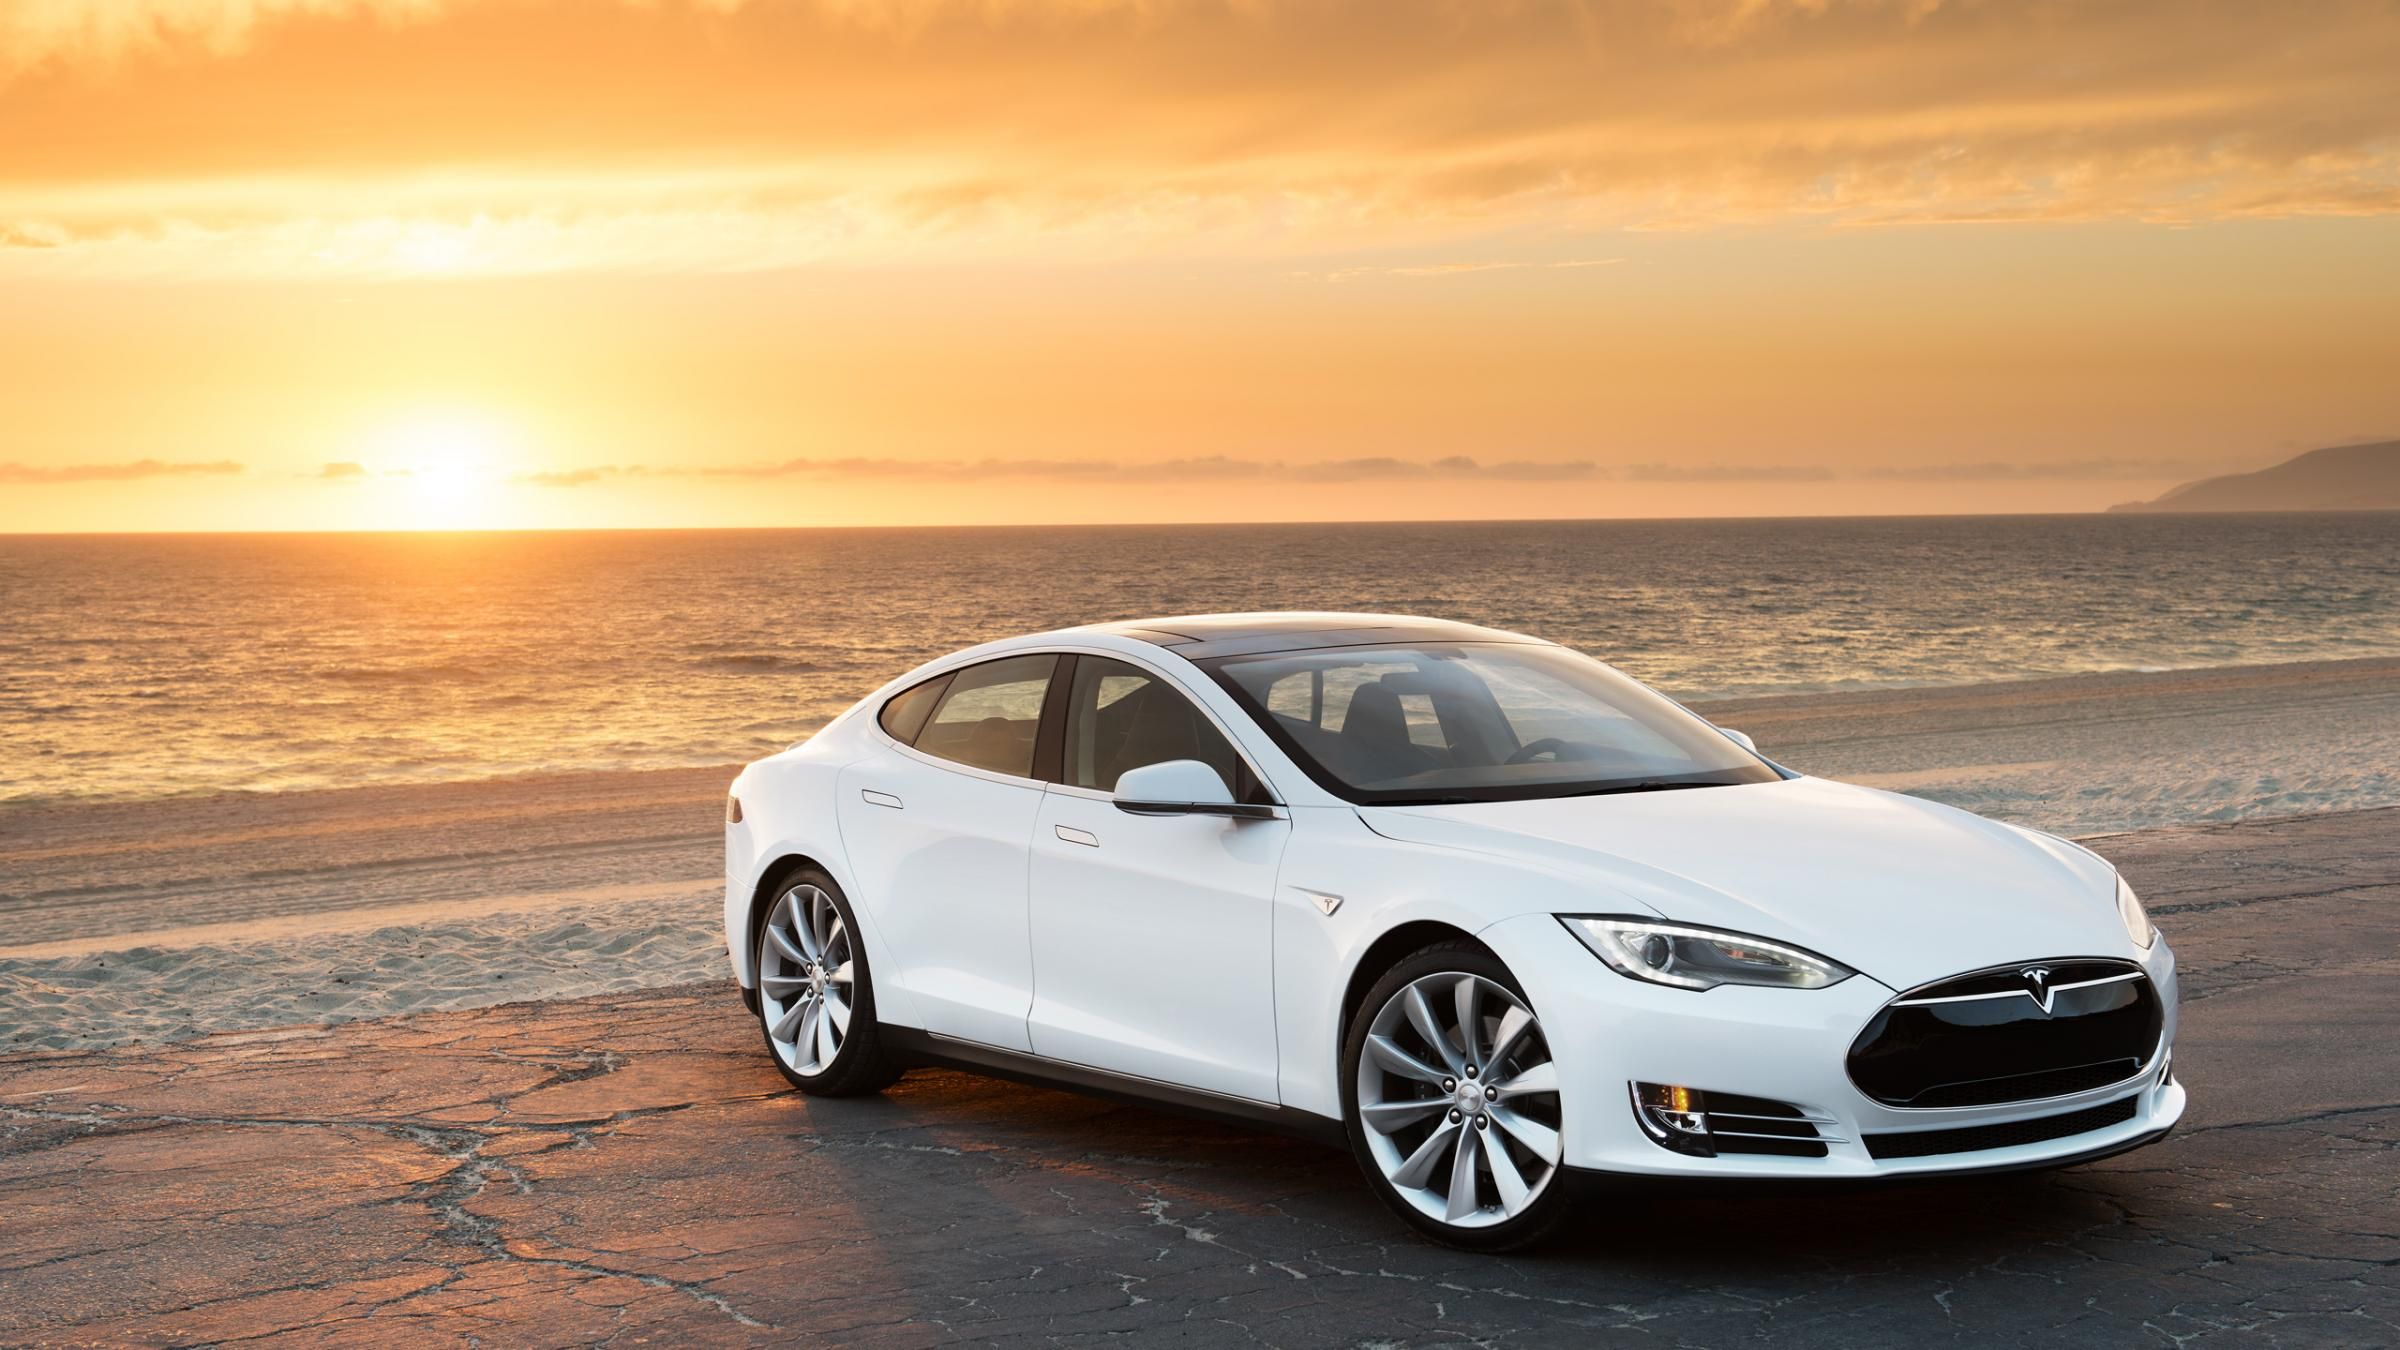 2016 Wireless Charging Option For Tesla Model S To Become Available This April